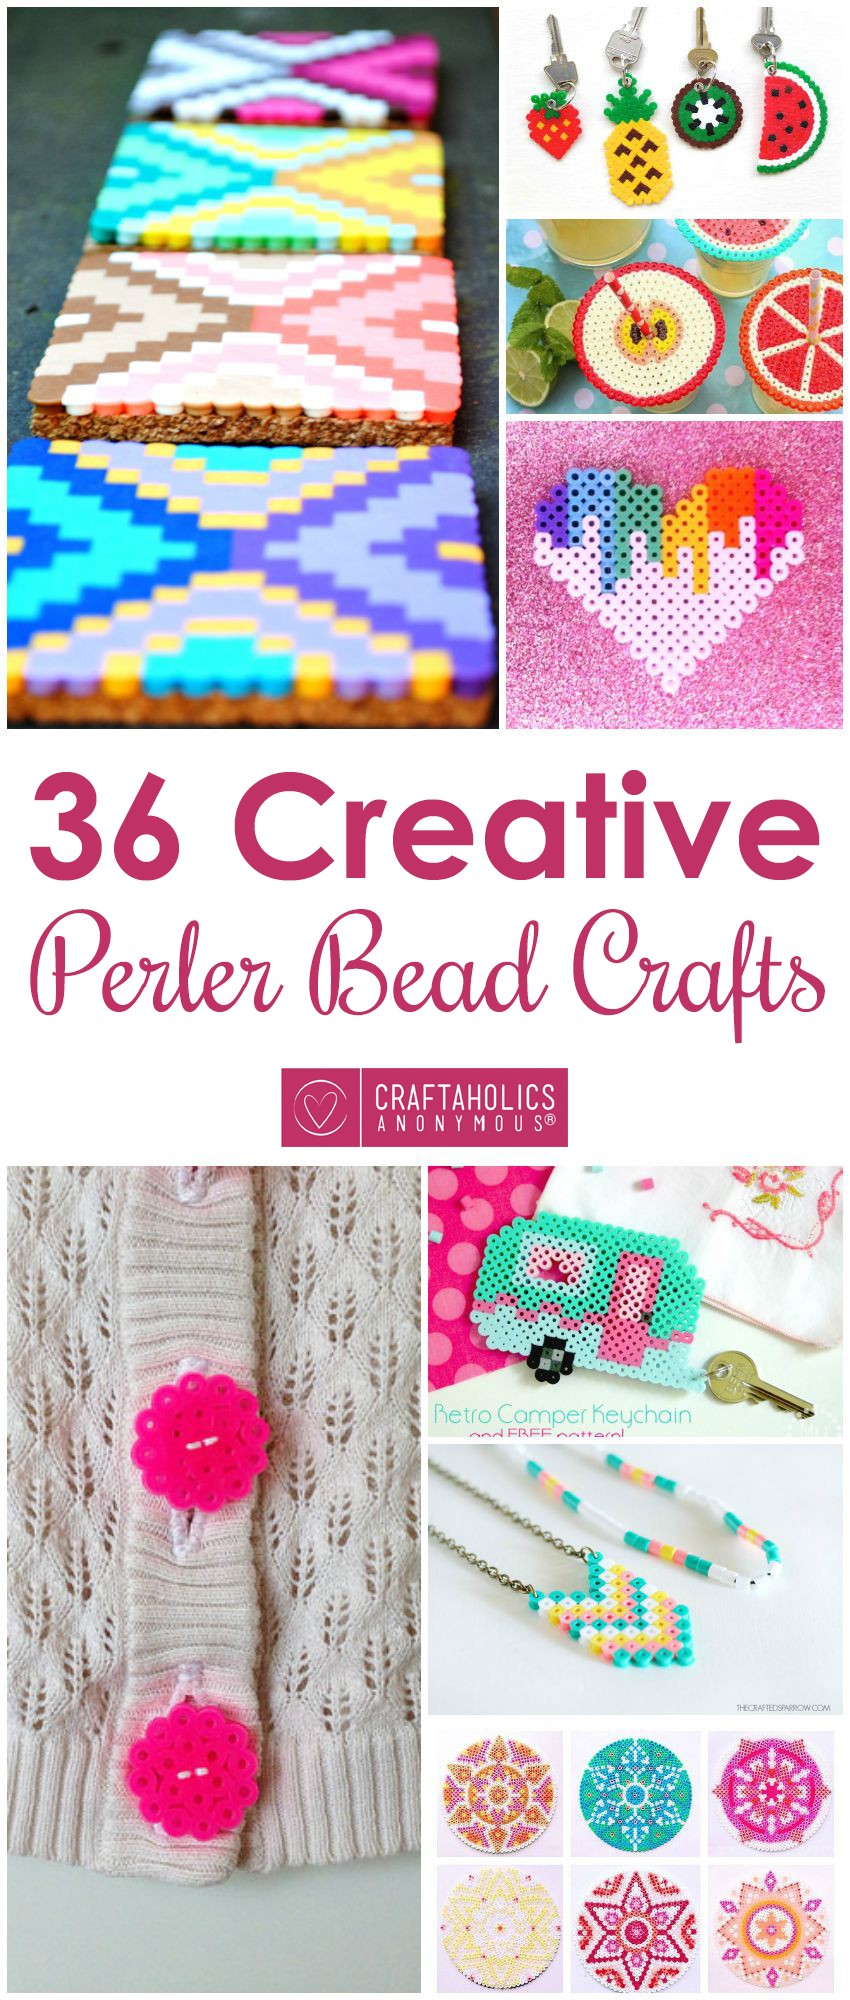 20 Fun Free Patterns For Perler Bead Crafts - The Crafty Blog Stalker